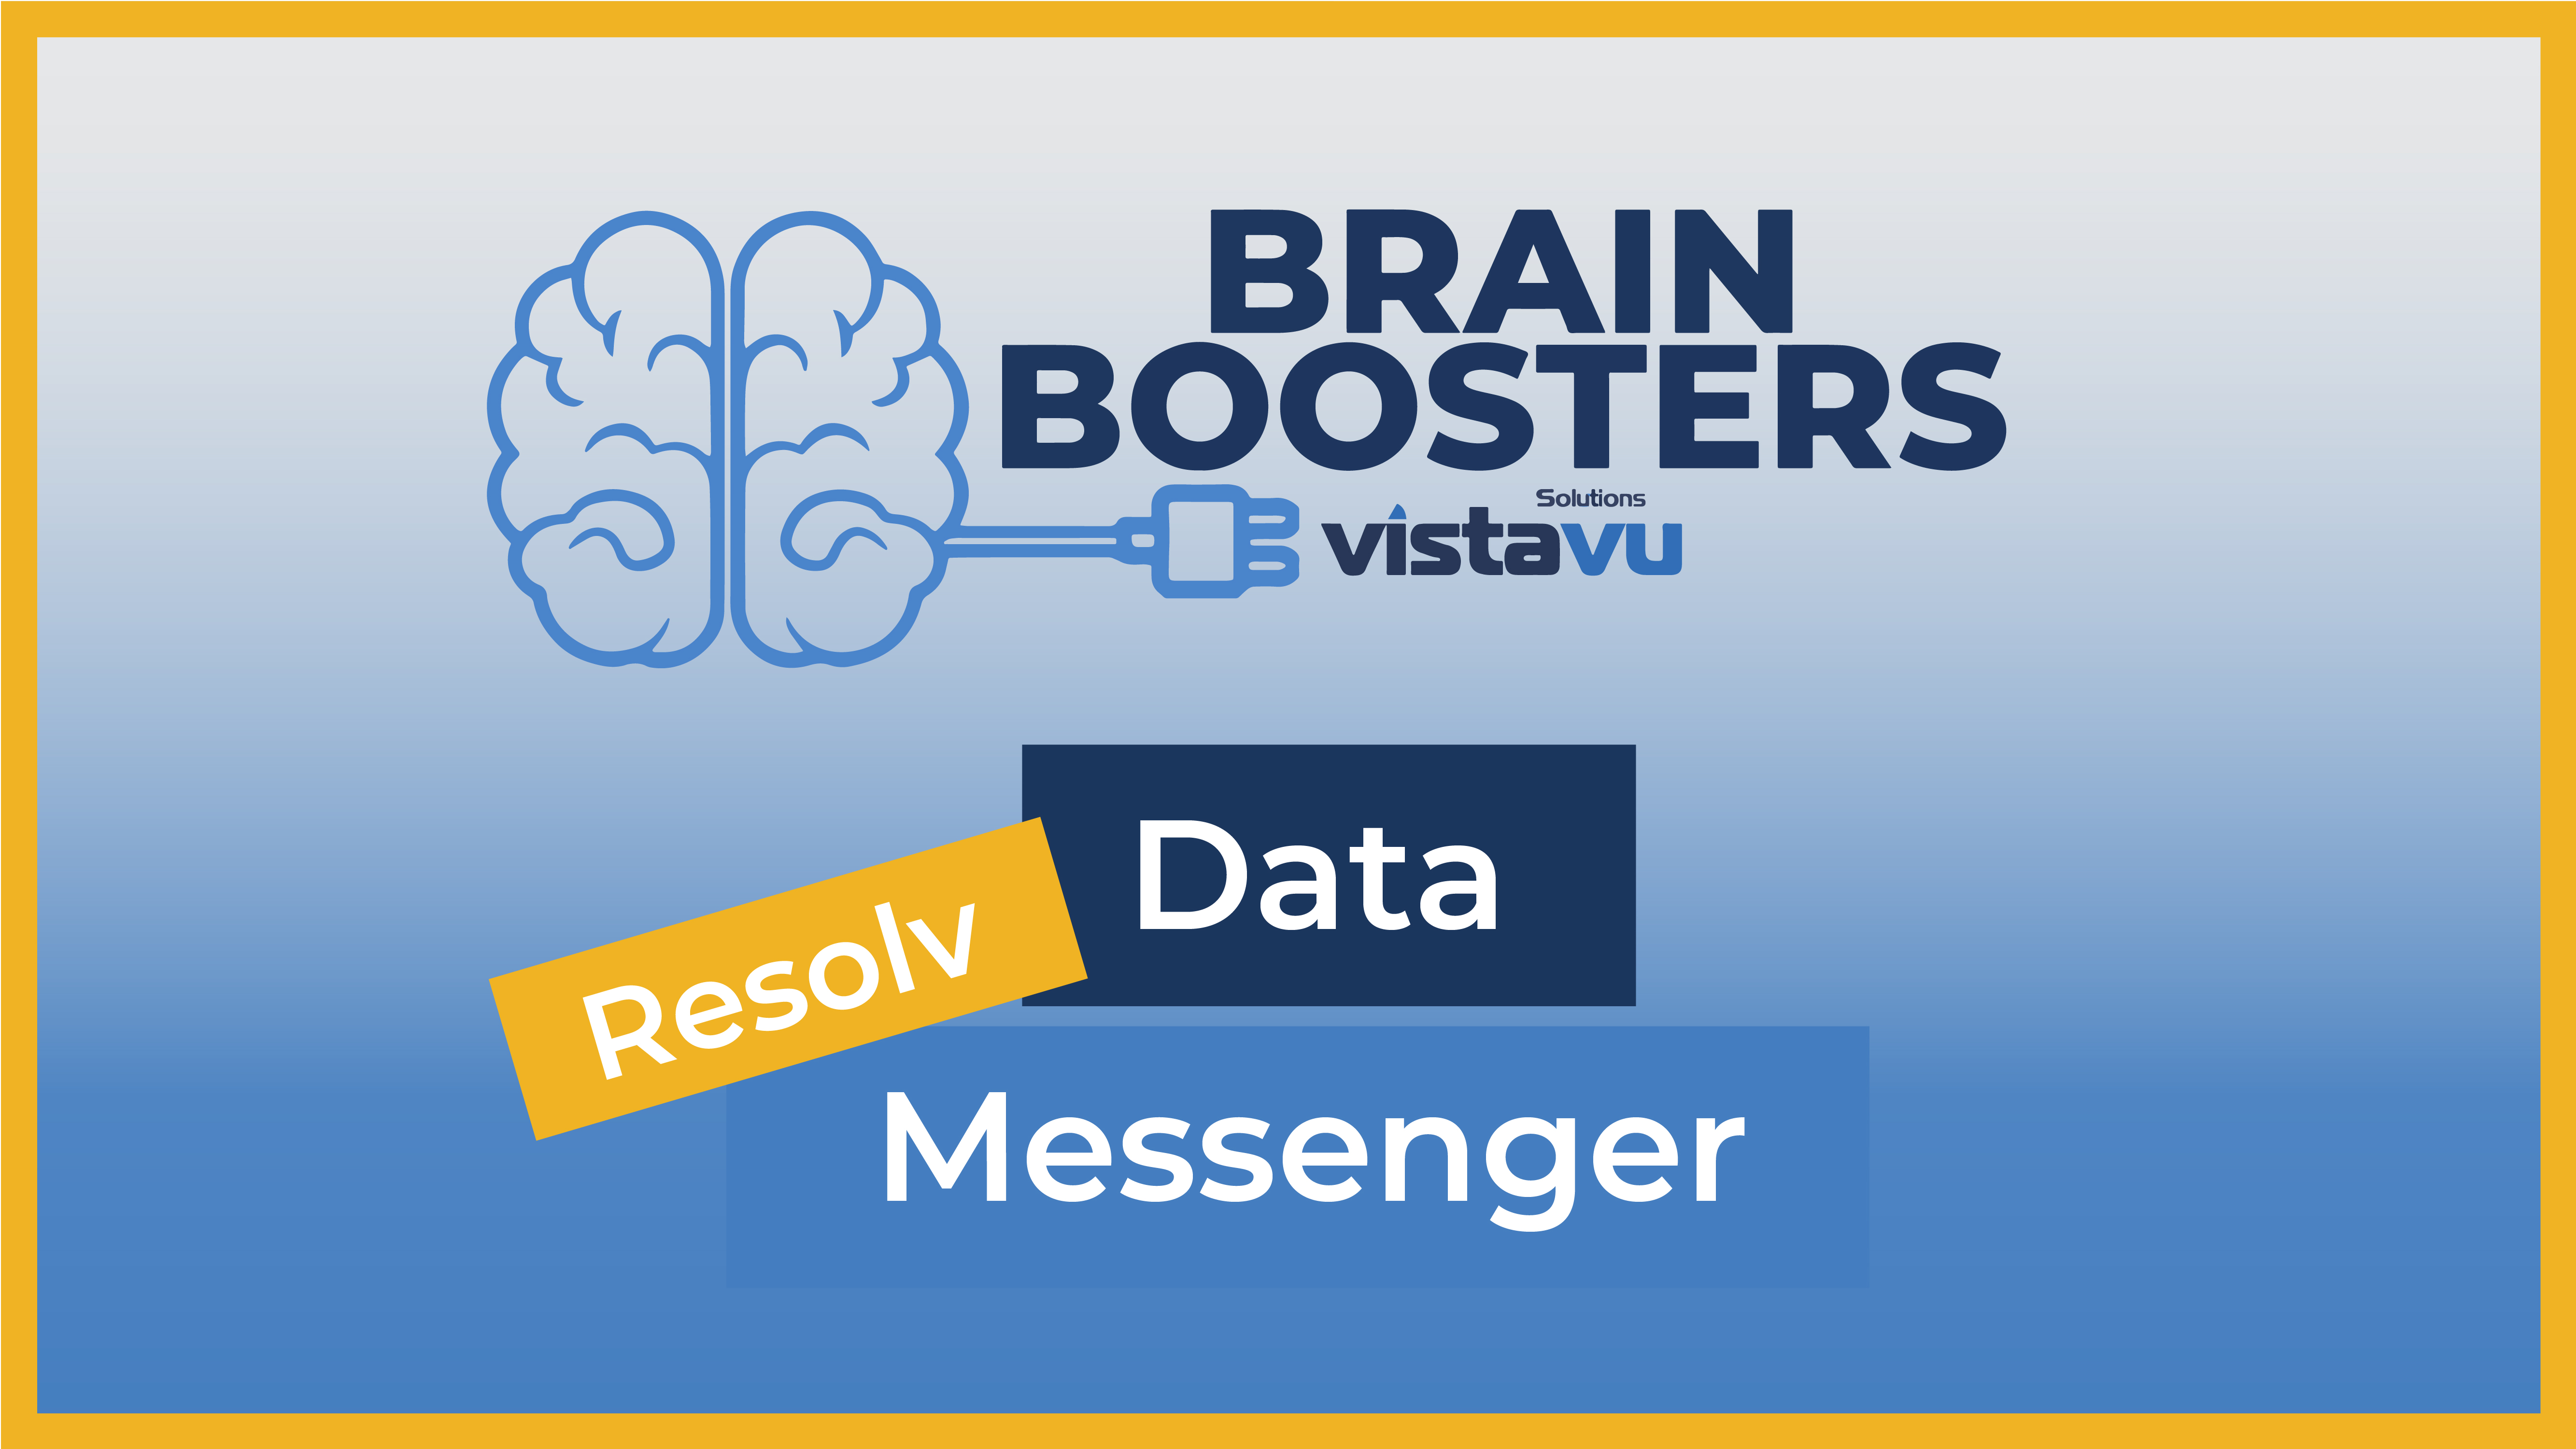 [Brain Boosters] Resolv Data Messenger & Document Delivery in SAP Business One